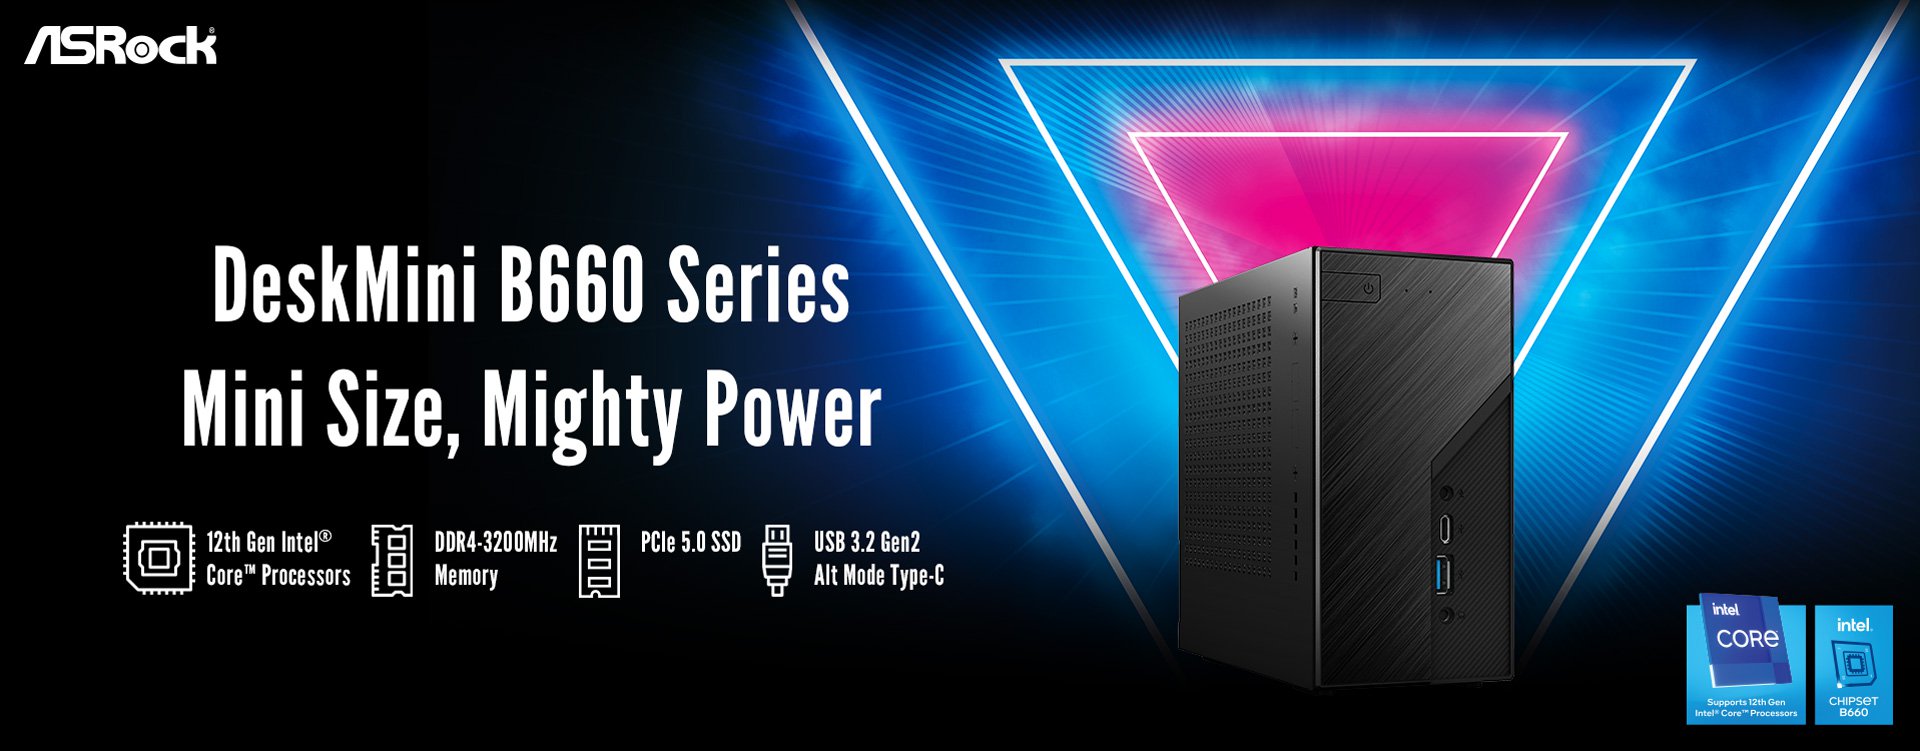 ASRock Launches DeskMini B660 Series Mini Size, Mighty Power With Cutting-edge Technology